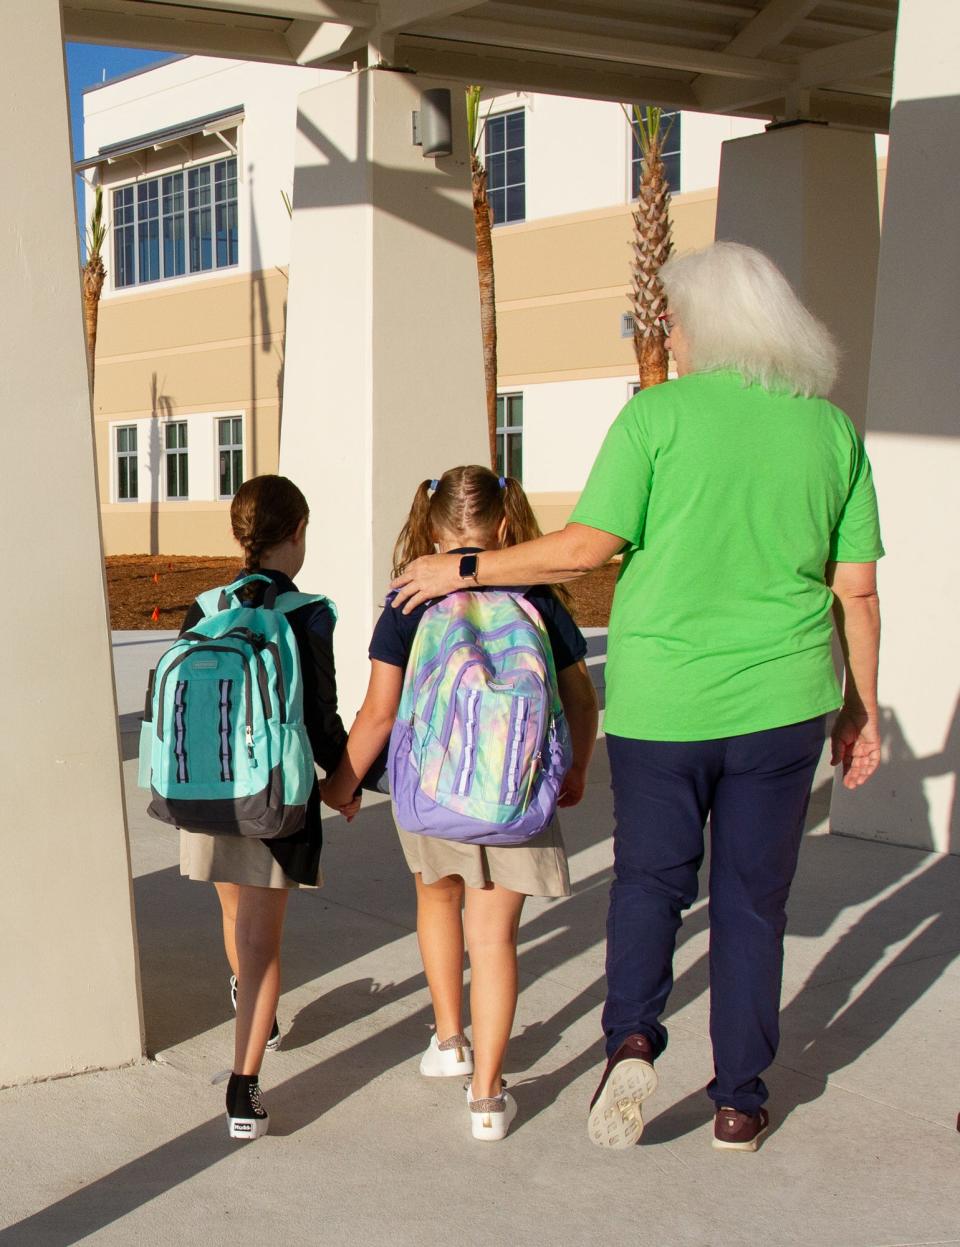 Andy King, a pre-kindergarten teacher at South Pointe Elementary, escorts two students toward the school's entrance Friday morning. It was the first day of classes for students in Polk County.